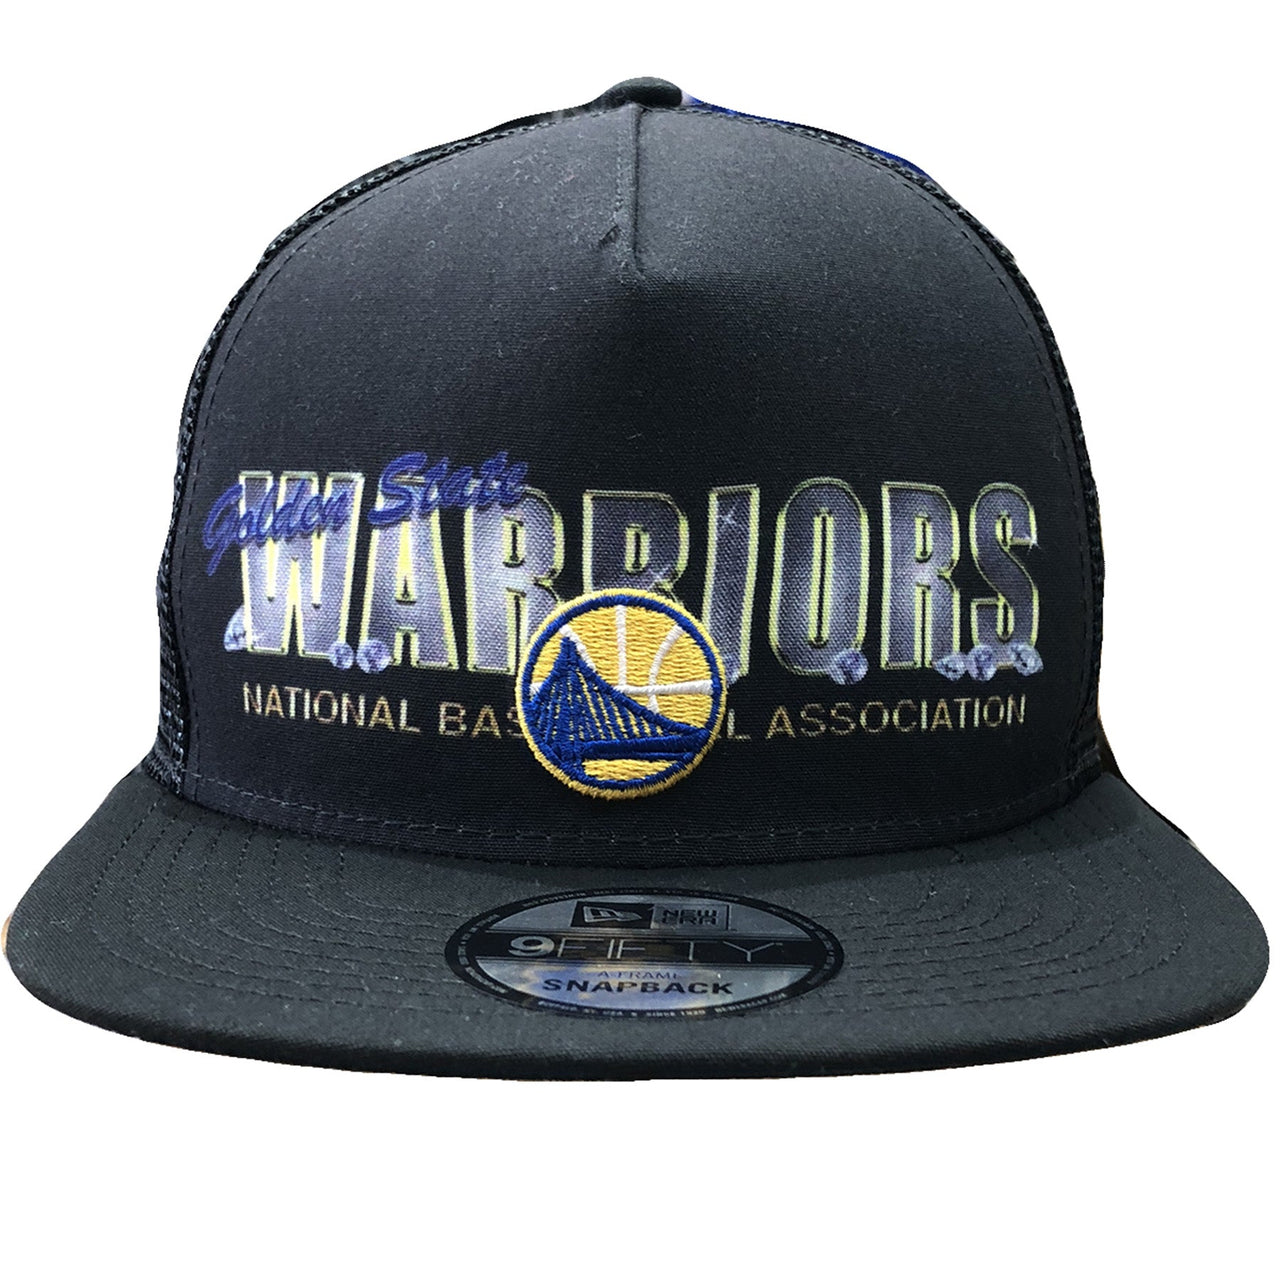 On the front of the Golden State Warriors Diamond Bling Trucker Snapback Hat has the golden state warriors logo embroidered on top of the Warriors print lettering